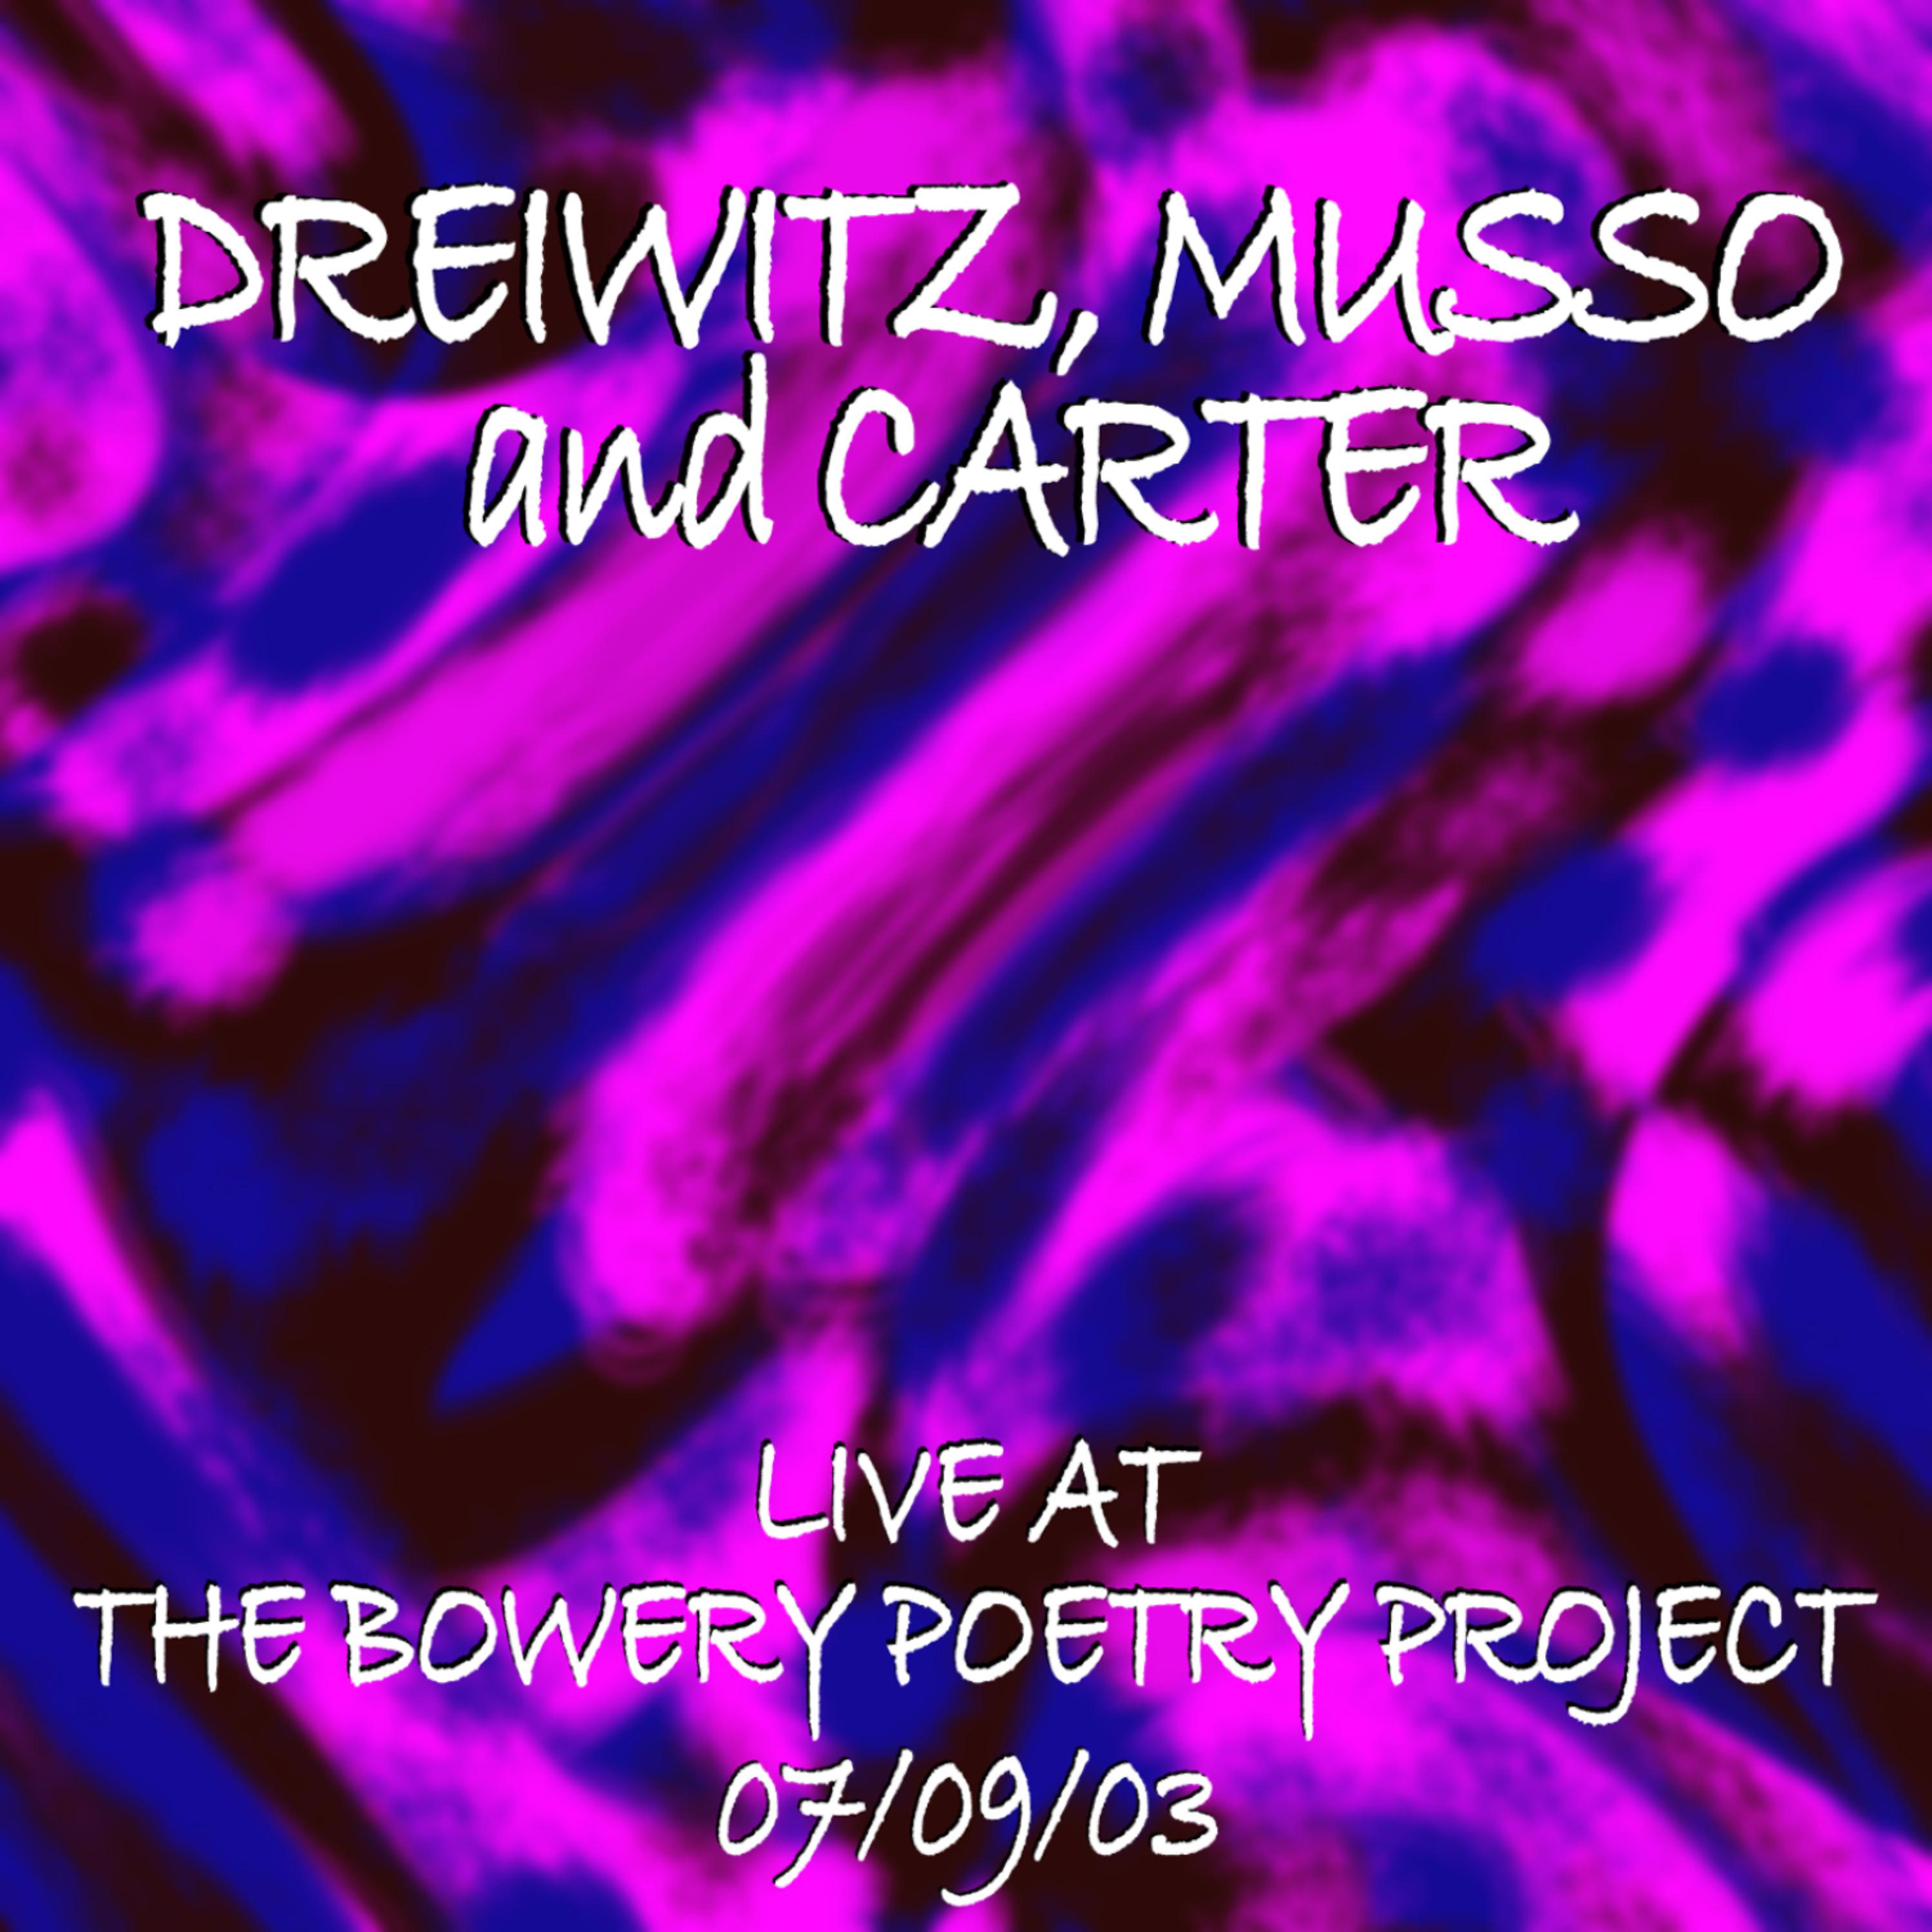 Постер альбома Dreiwitz, Musso, Carter Live at the Bowery Poetry Project 7/9/03